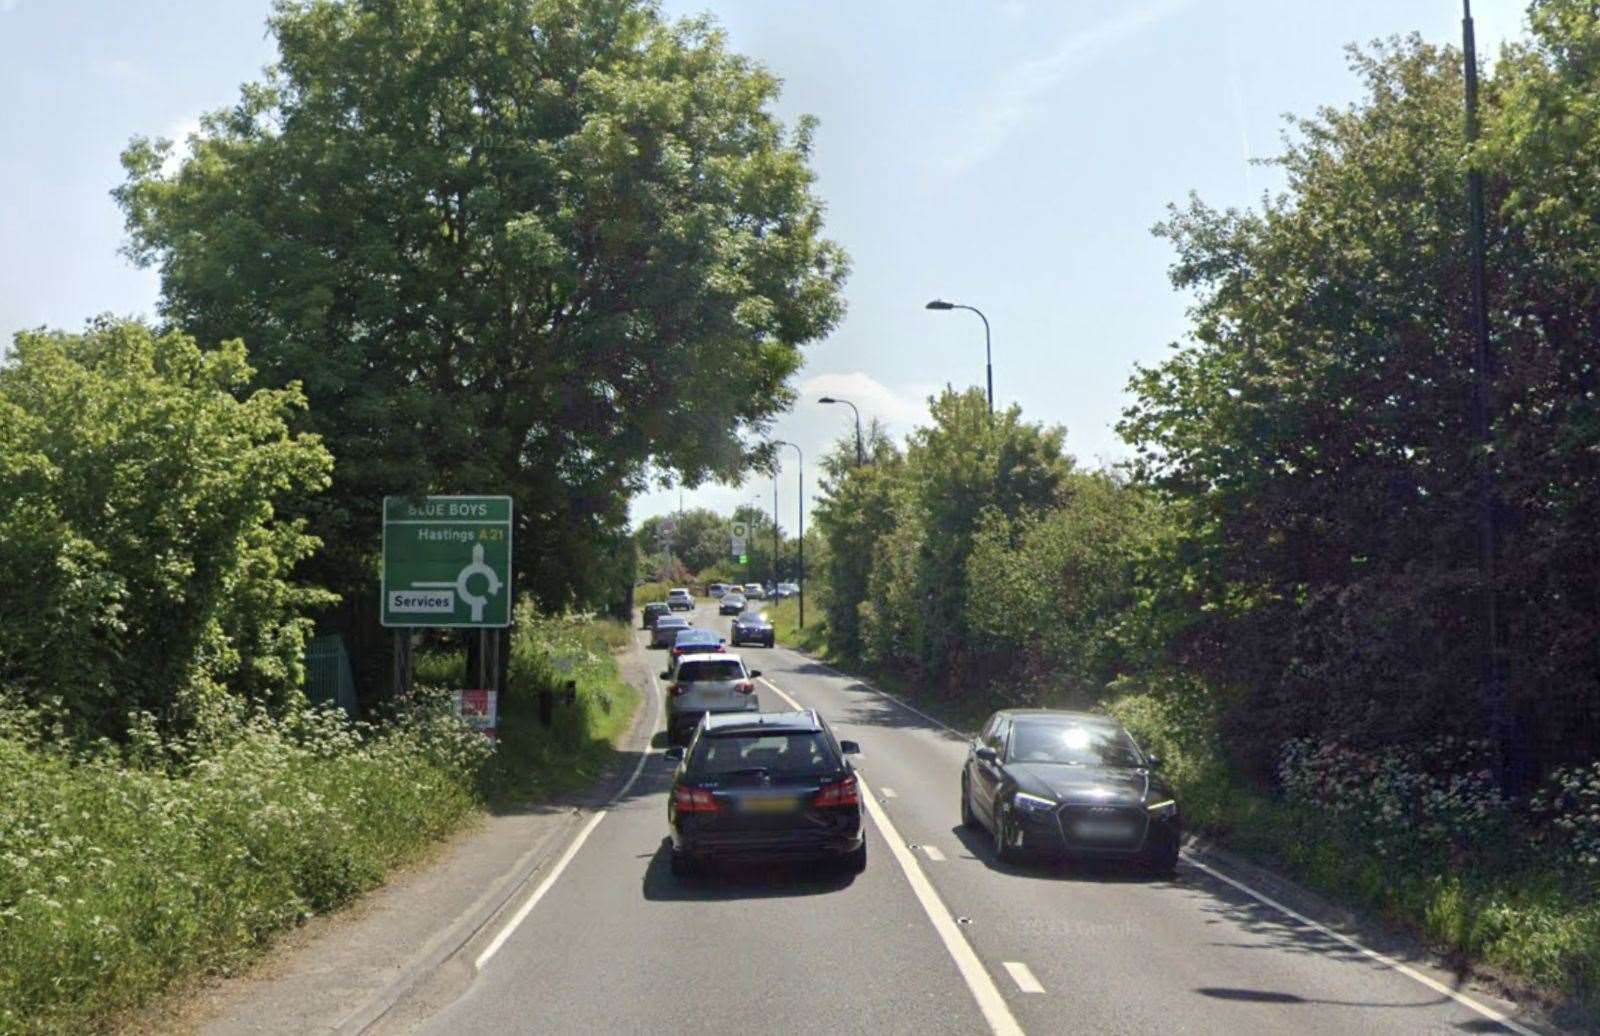 The A21 has been closed in both directions because of an accident and a fallen tree